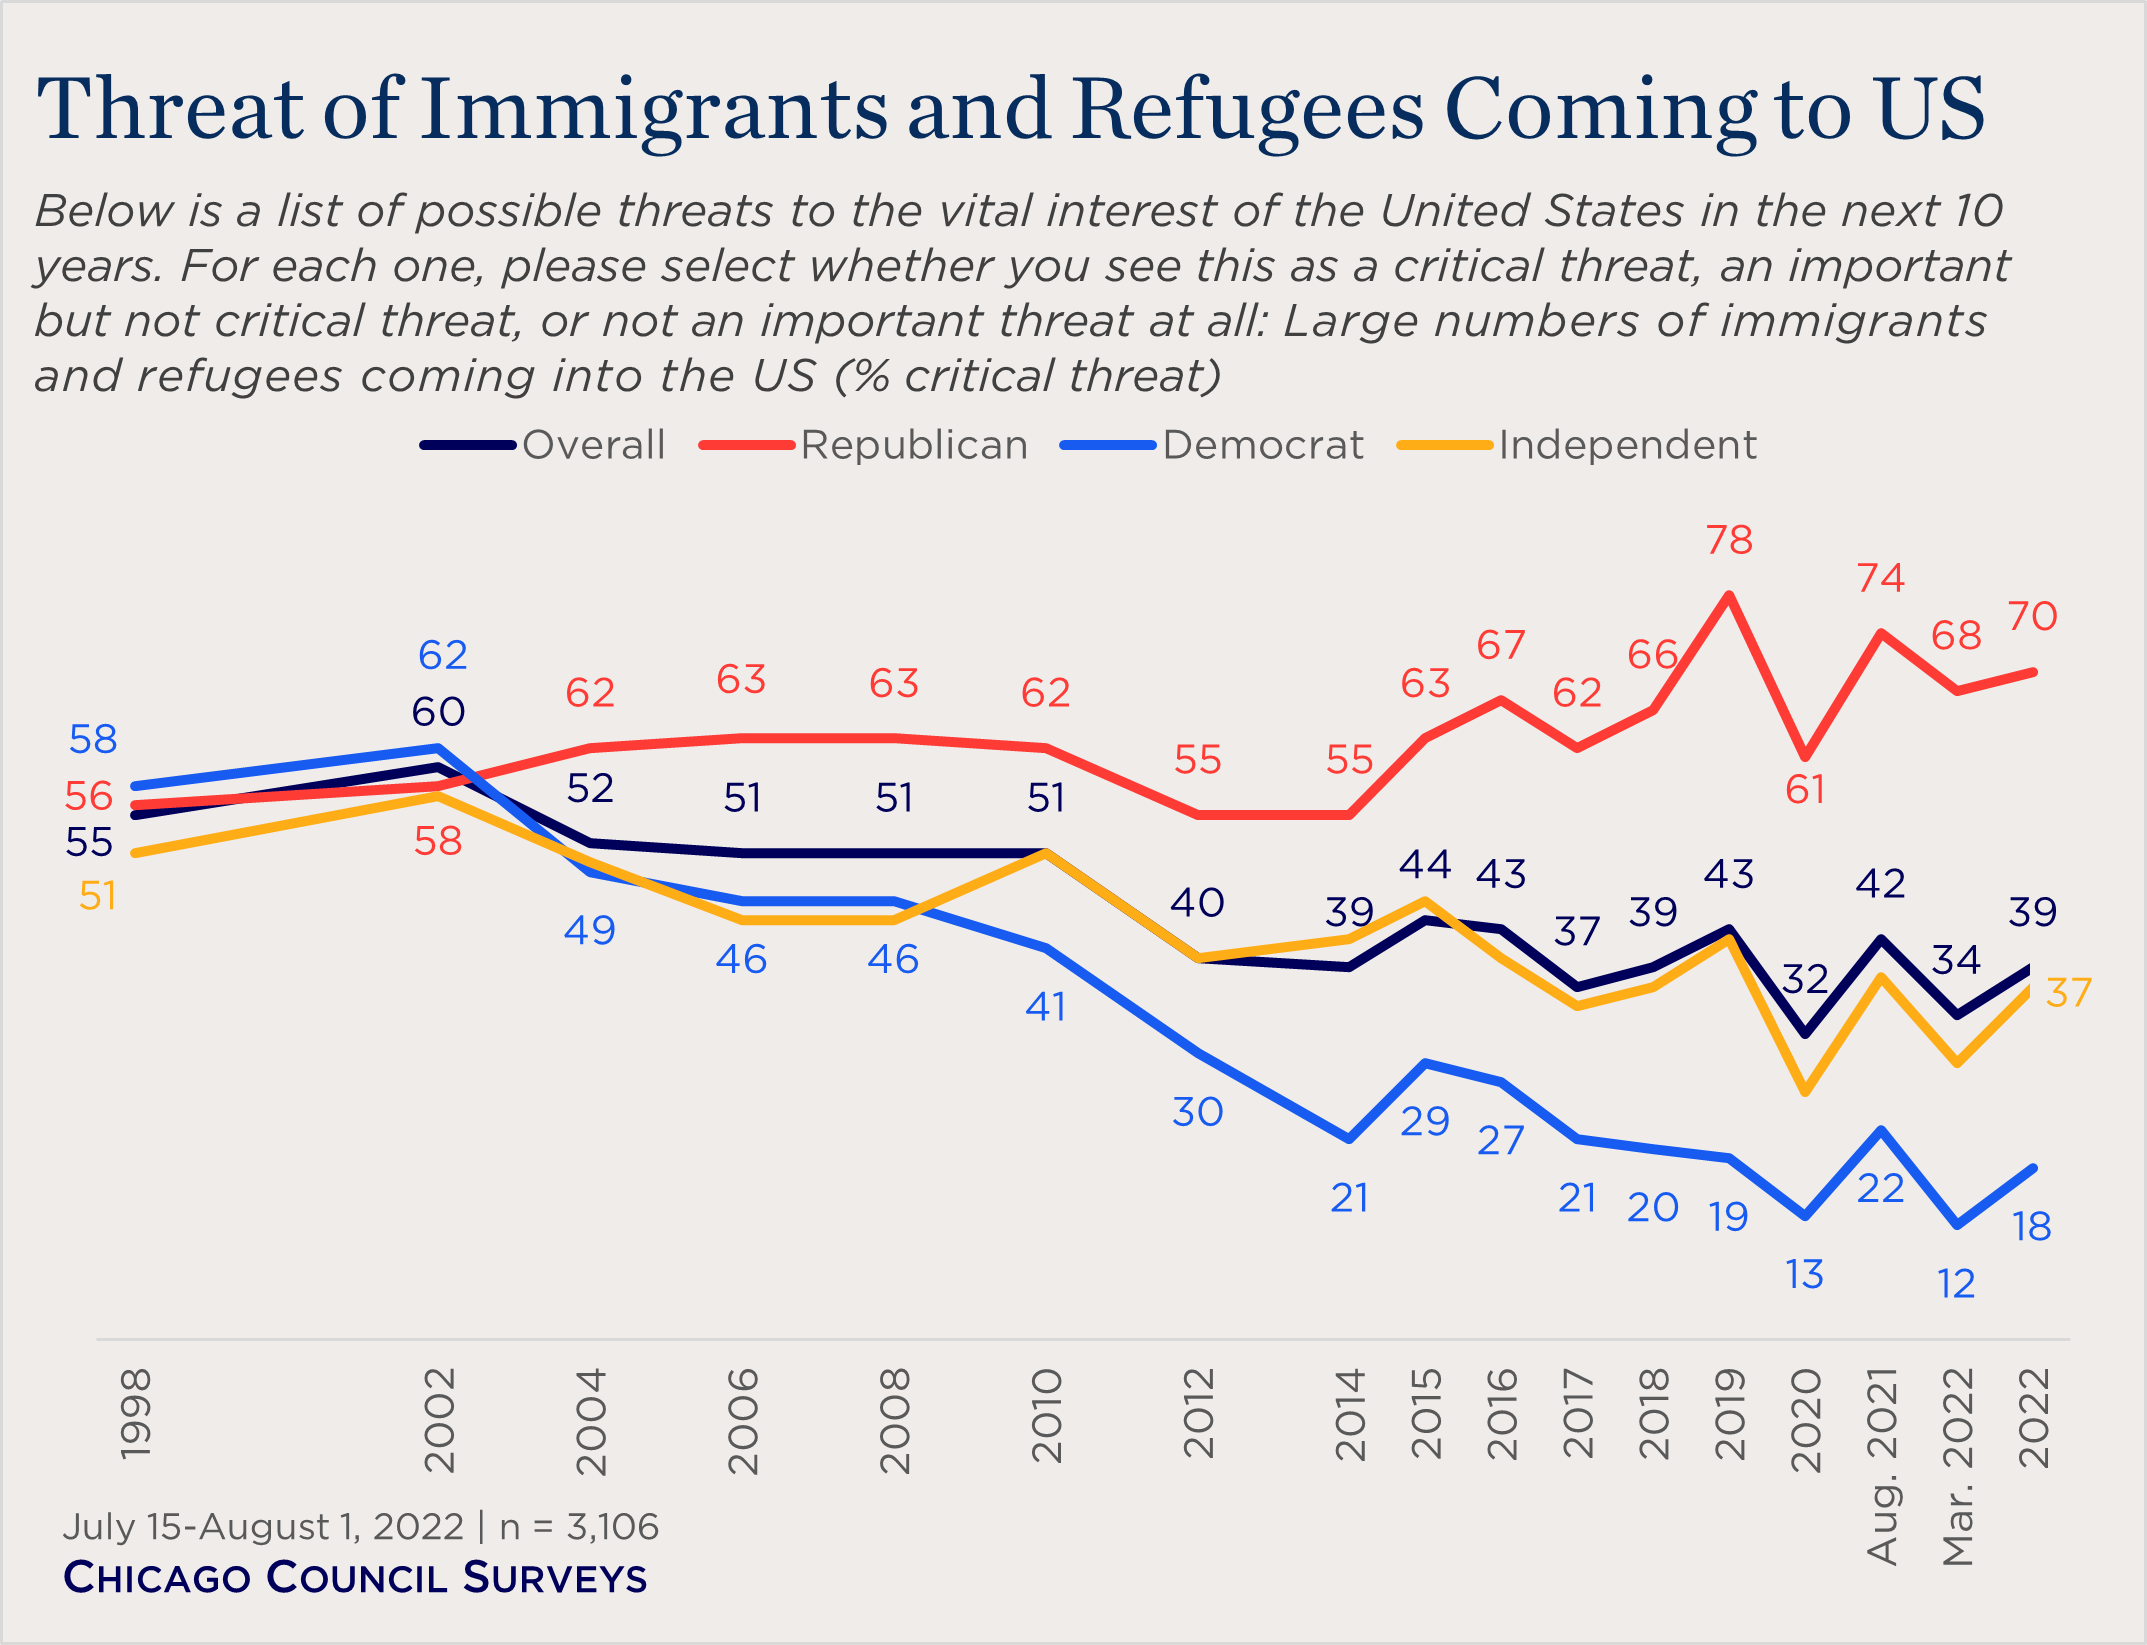 line chart showing partisan views of immigration as a critical threat over time